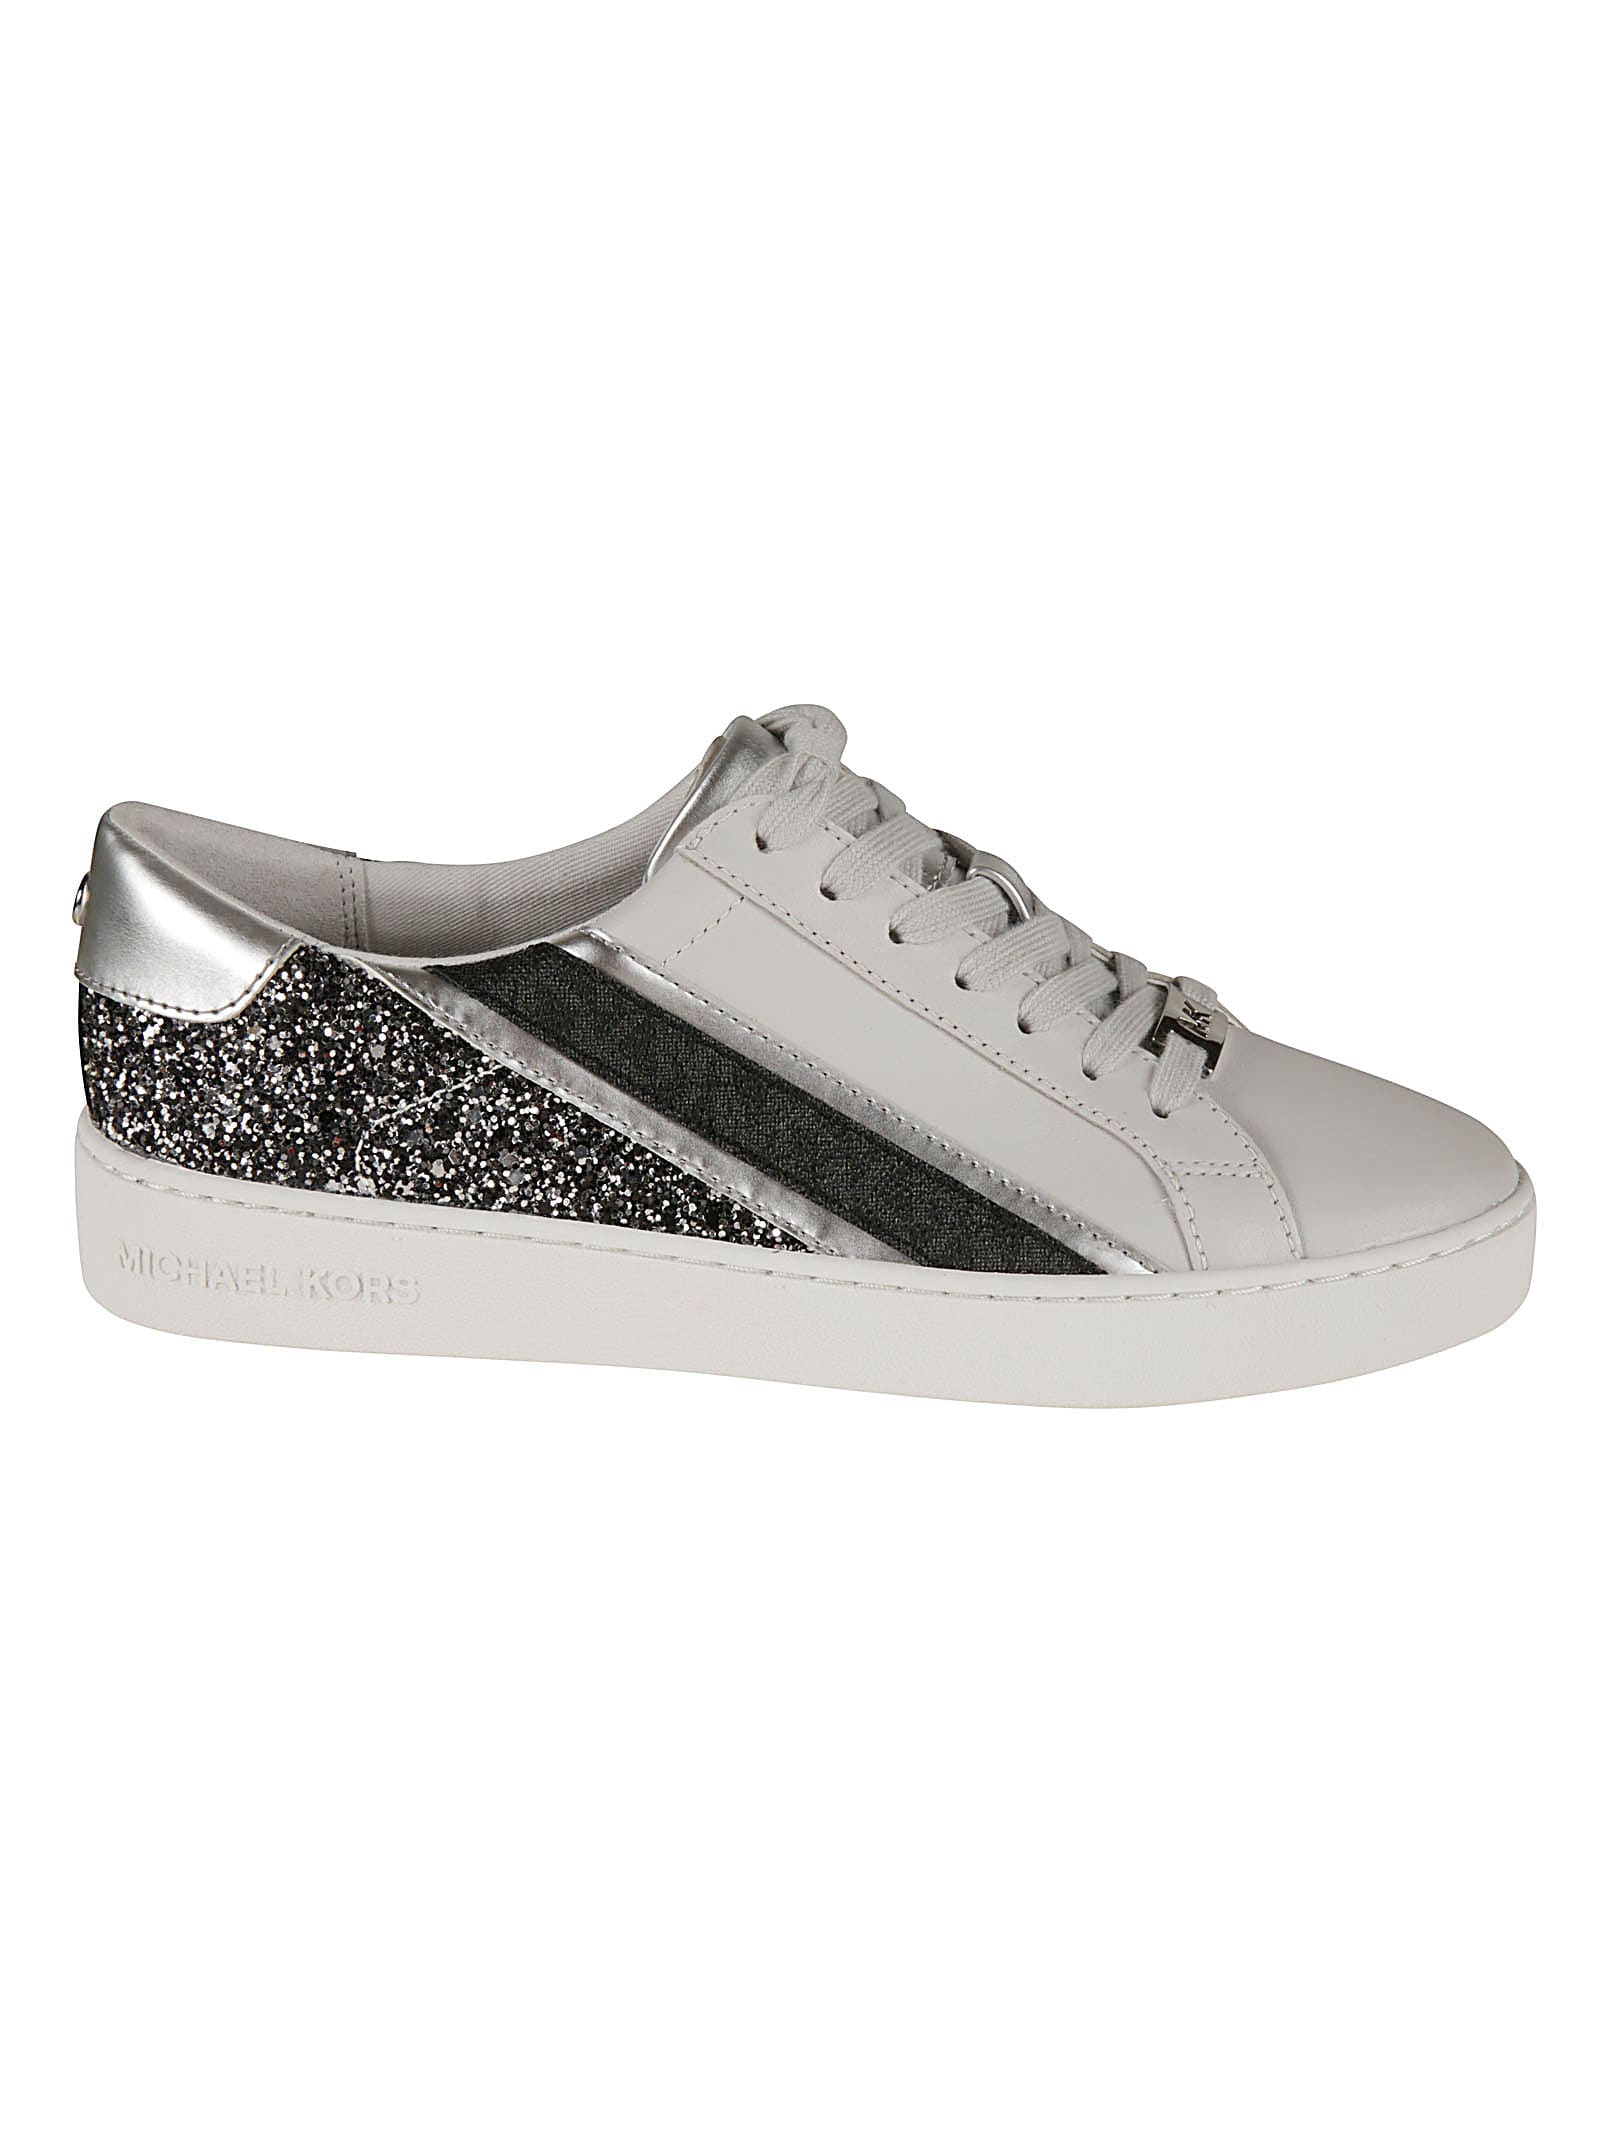 Buy Michael Kors Slade Lace-up Sneakers online, shop Michael Kors shoes with free shipping